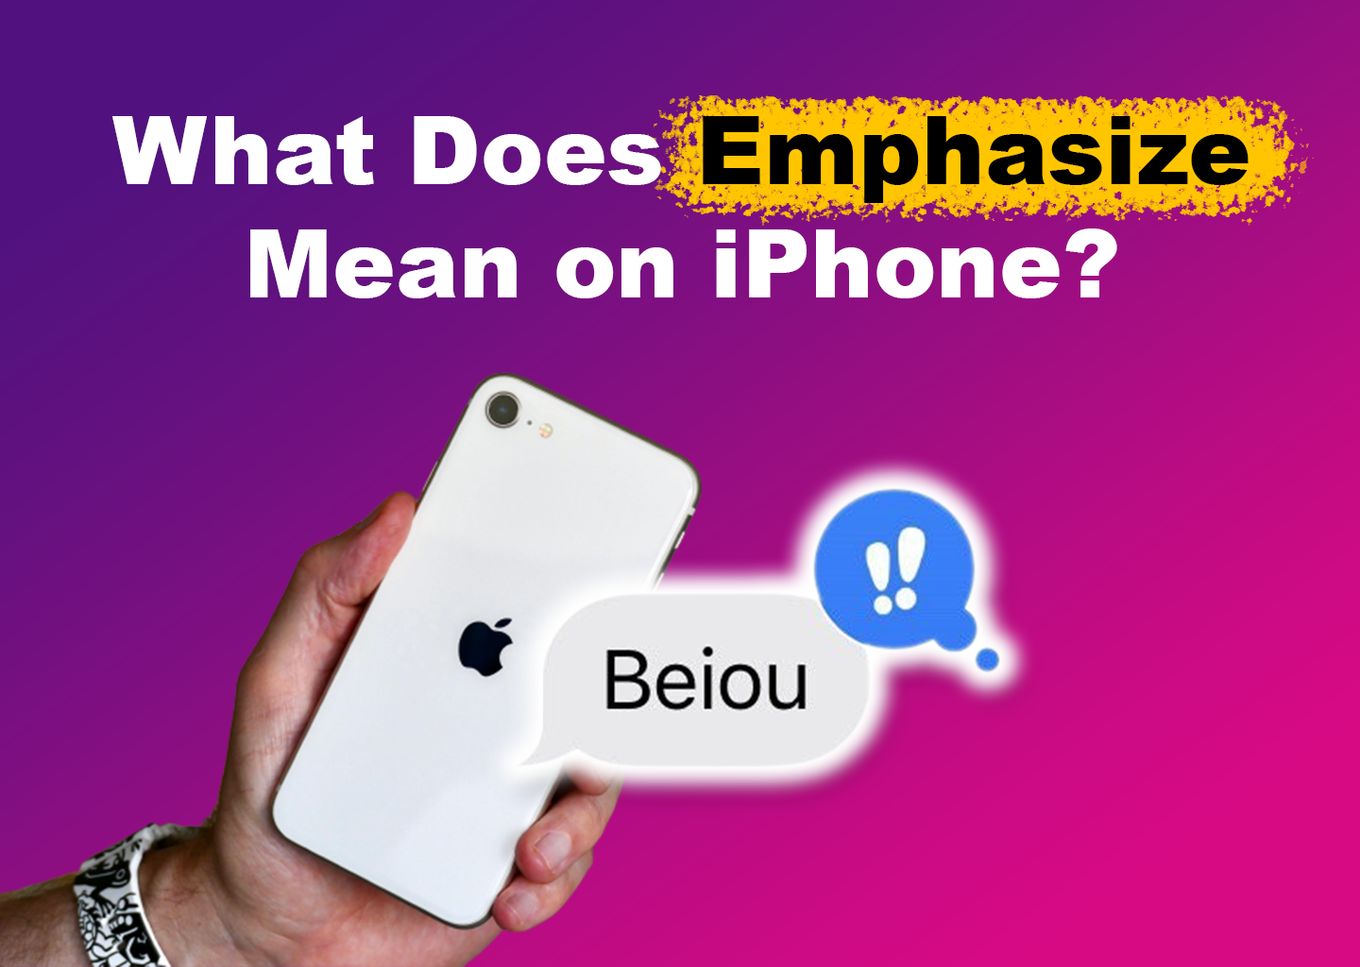 What Does Emphasize Mean on iPhone